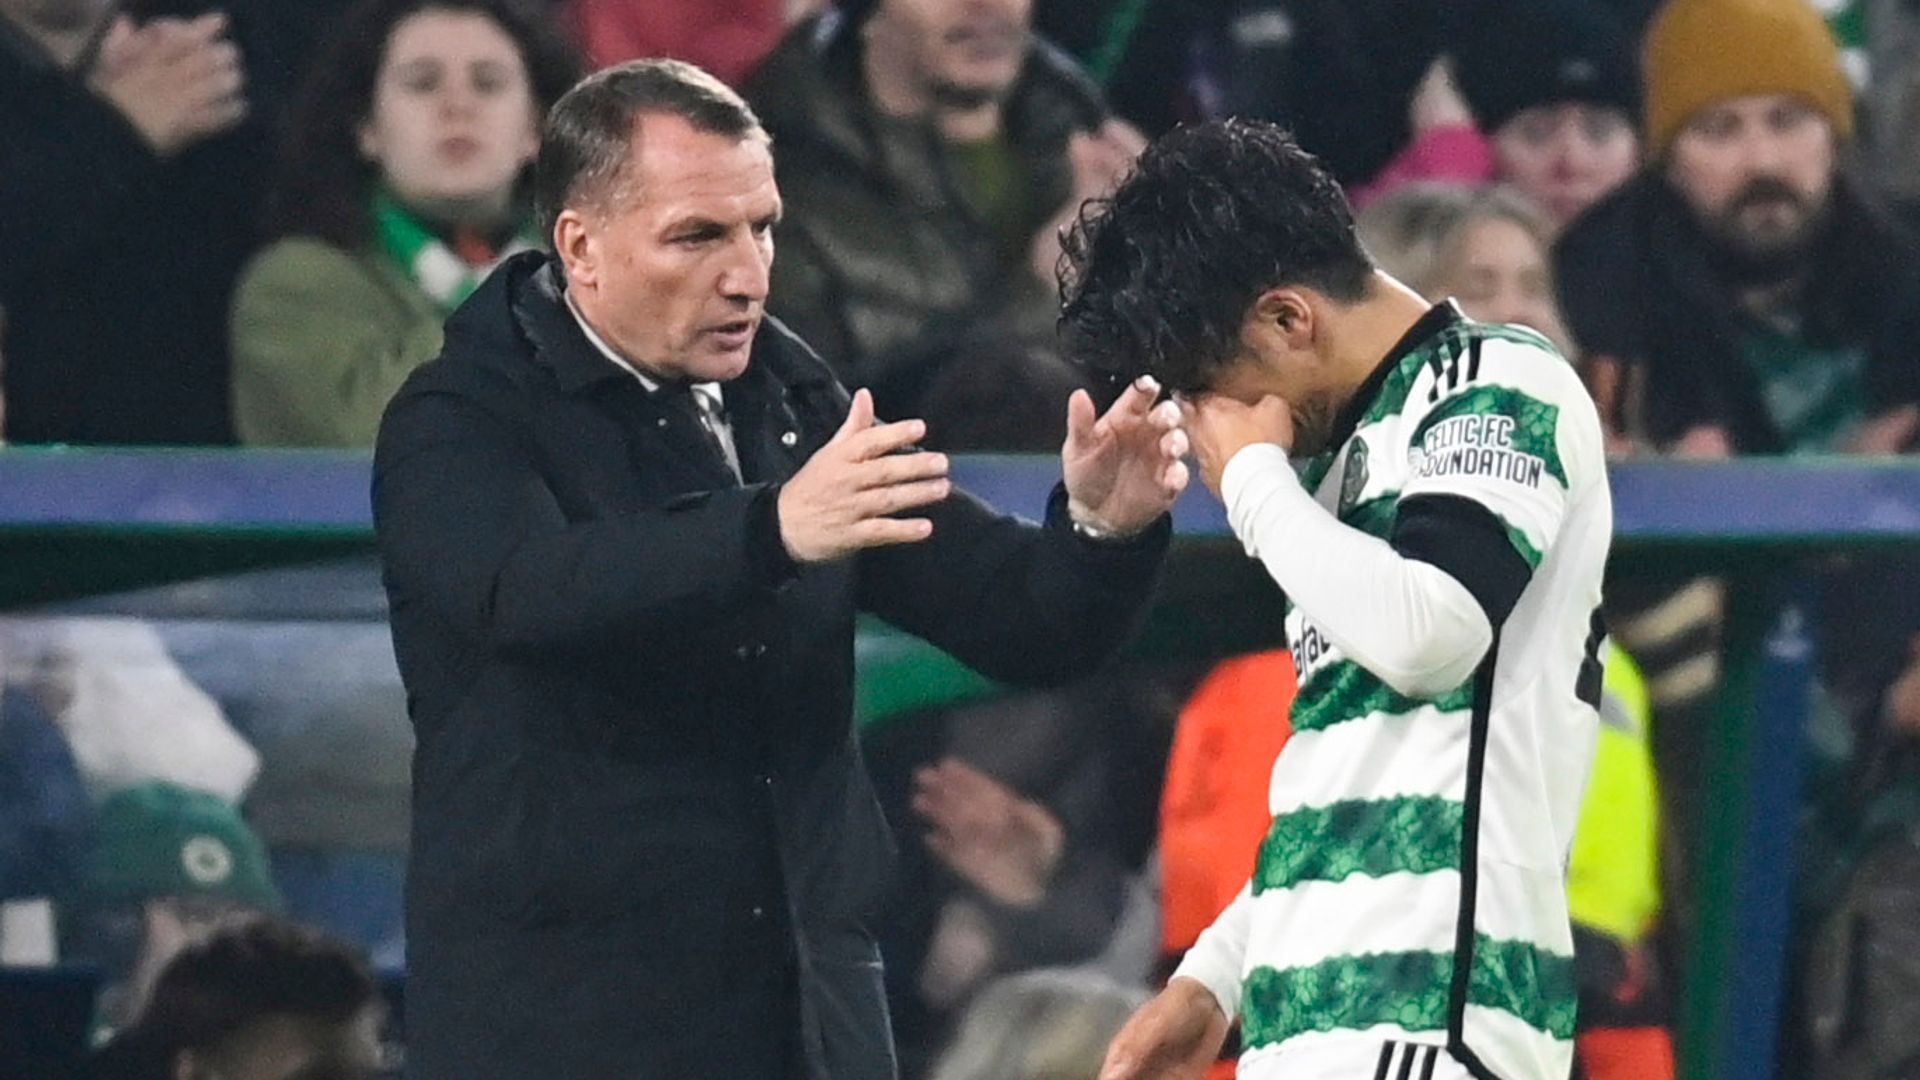 Celtic's Hatate out until after Christmas with hamstring injury